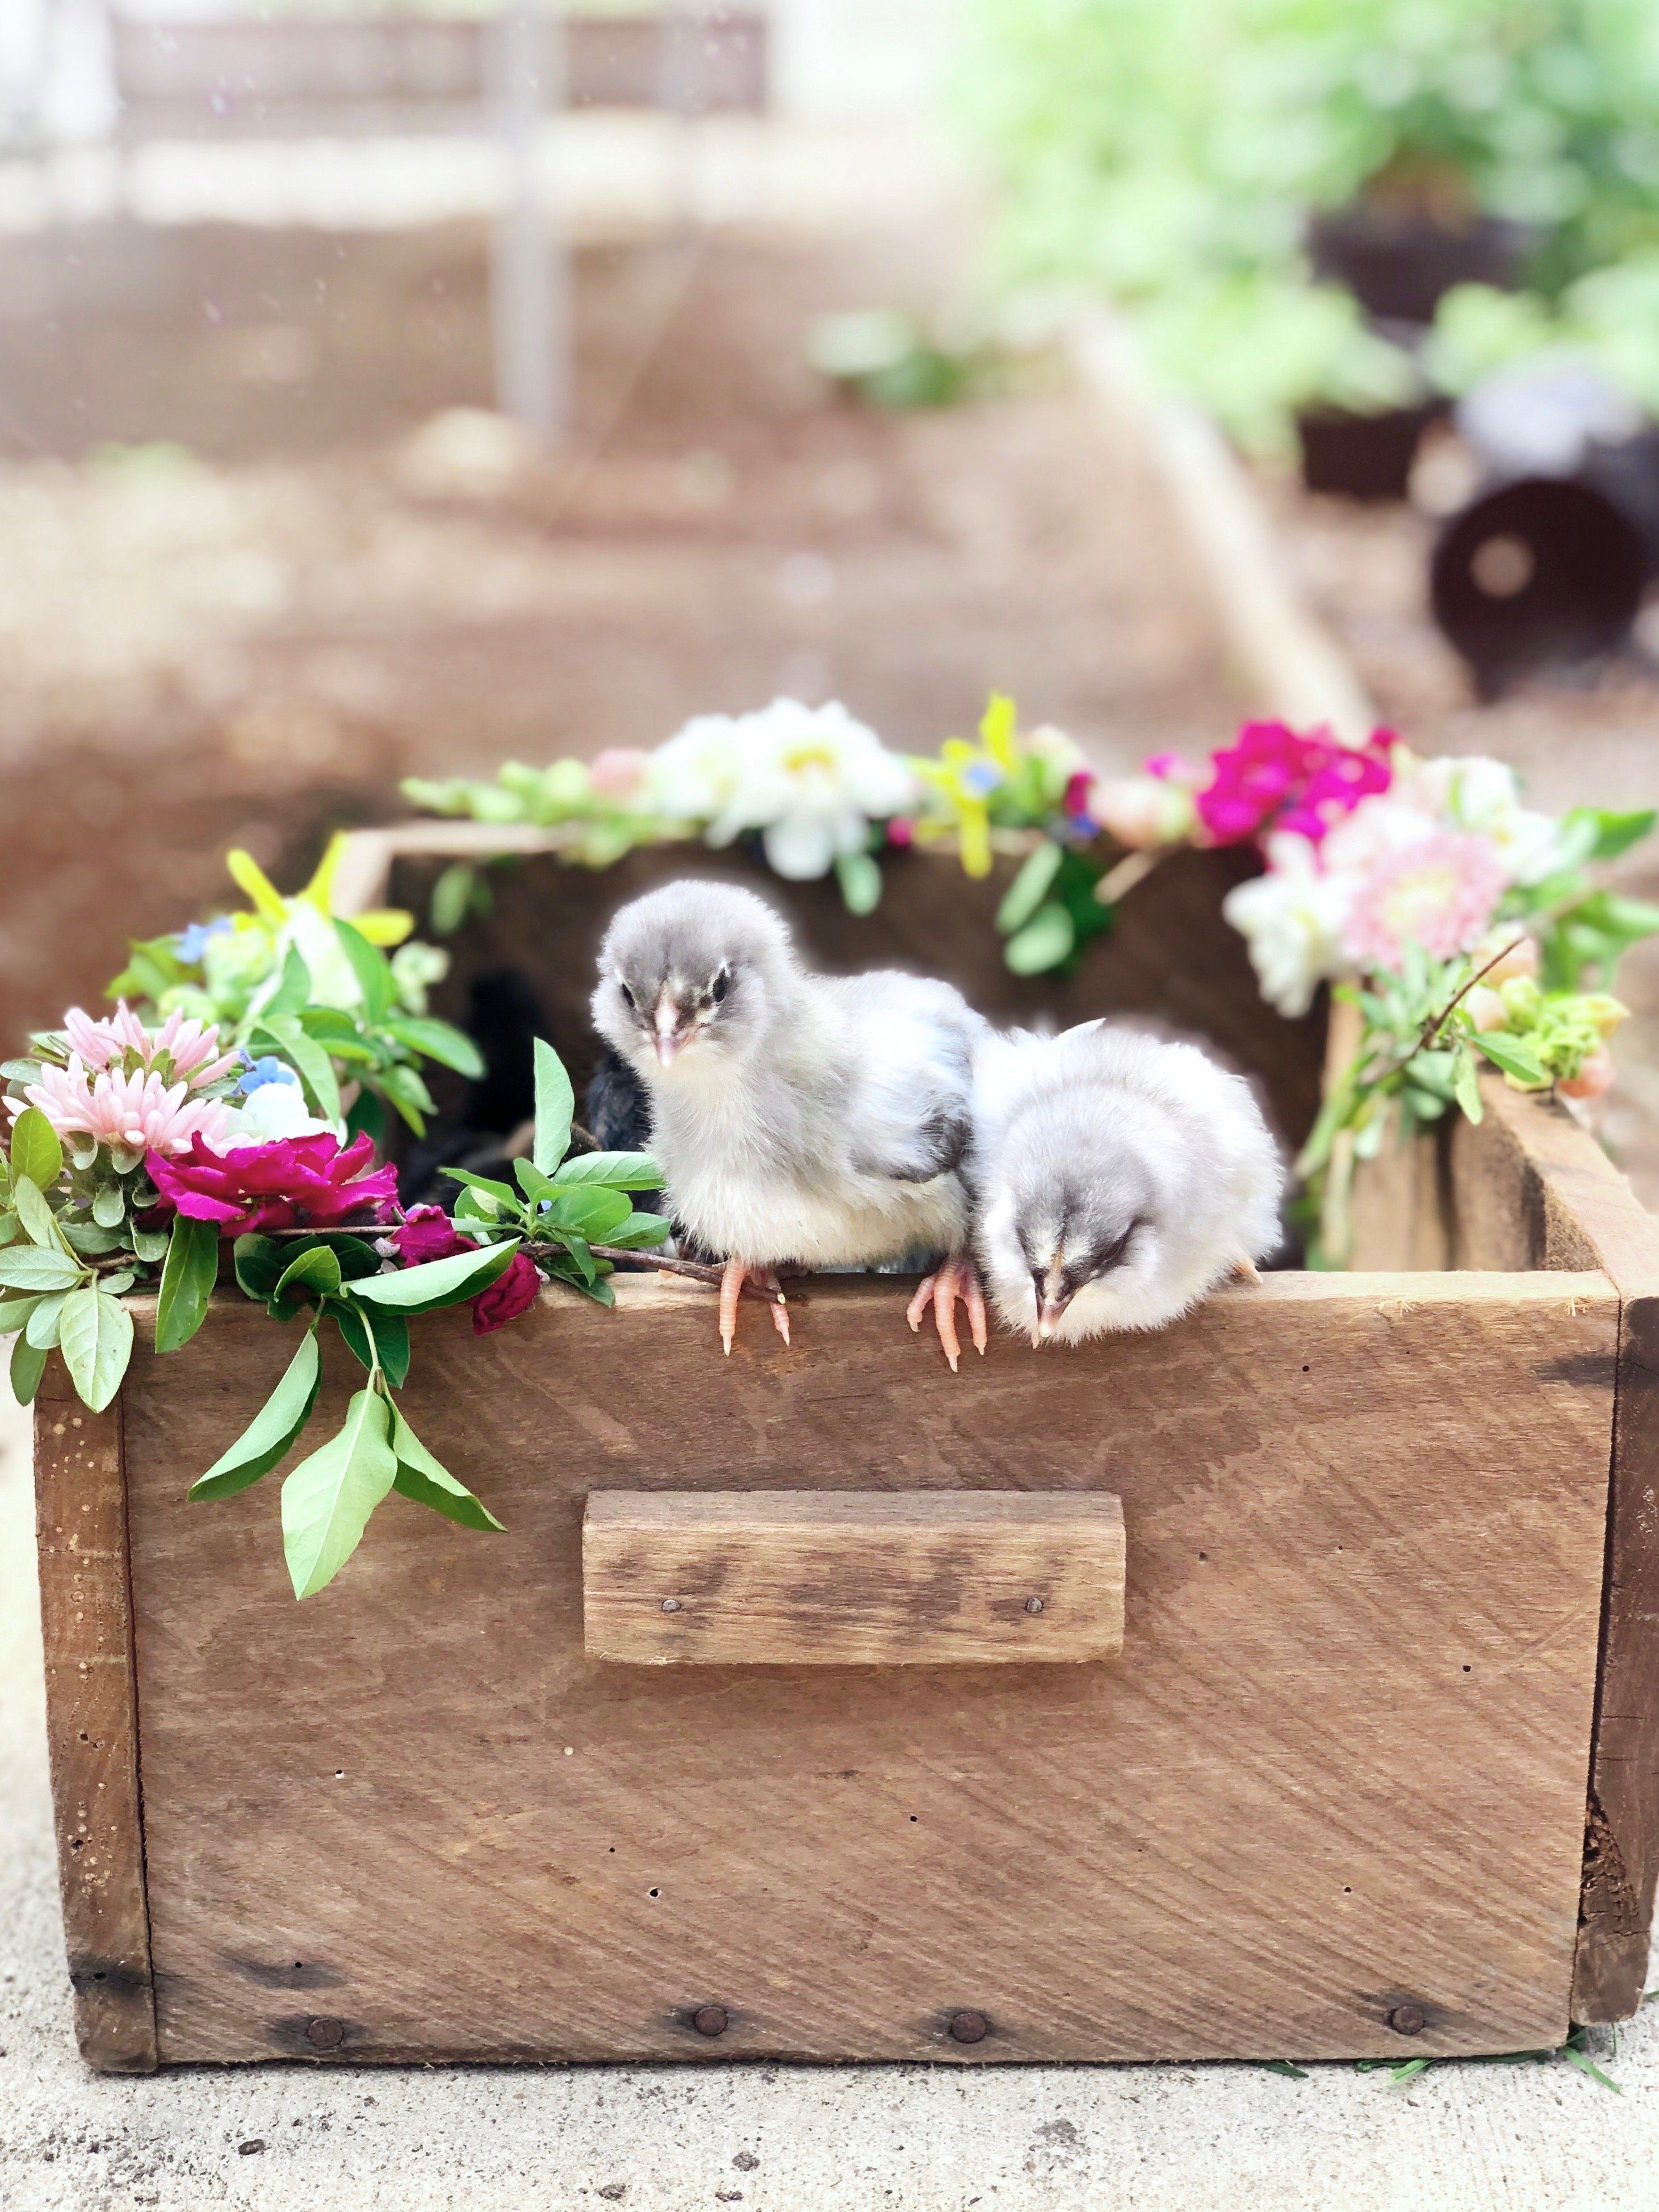 Previous Happening: New chicks coming to the farm!